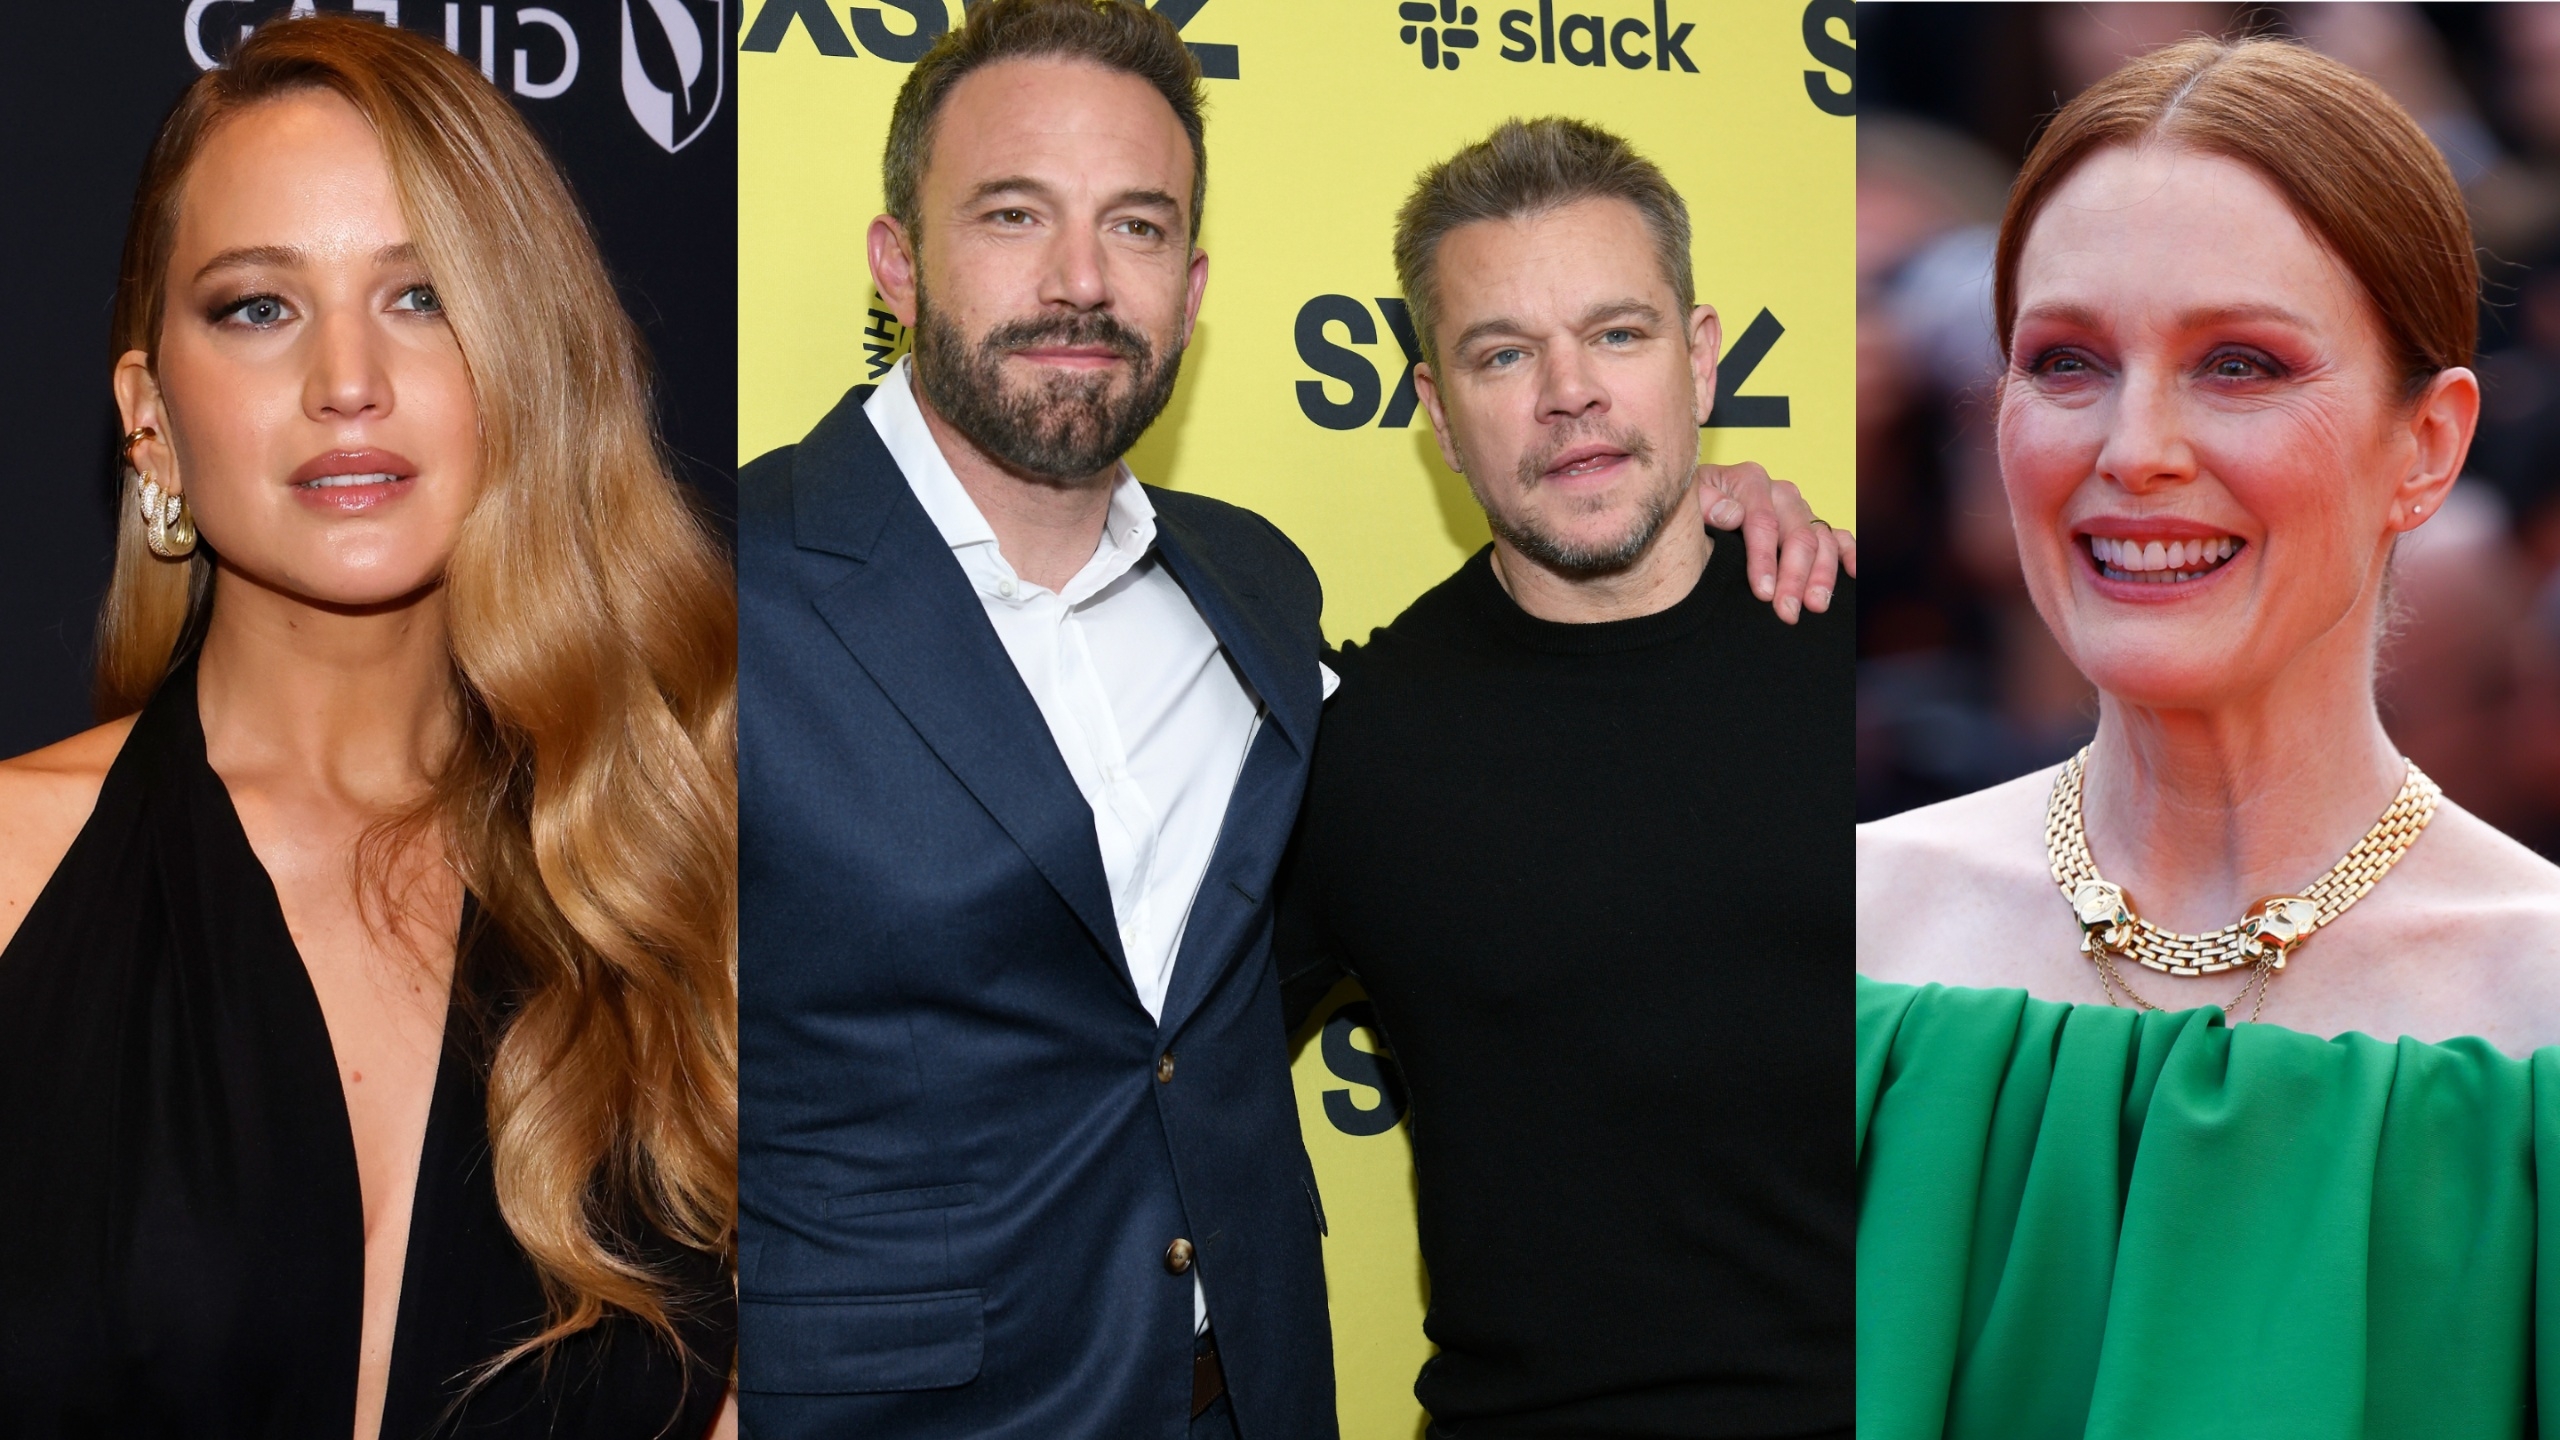 Jennifer Lawrence finds her Housewives, Matt Damon and Ben Affleck reunite, and more casting news this week